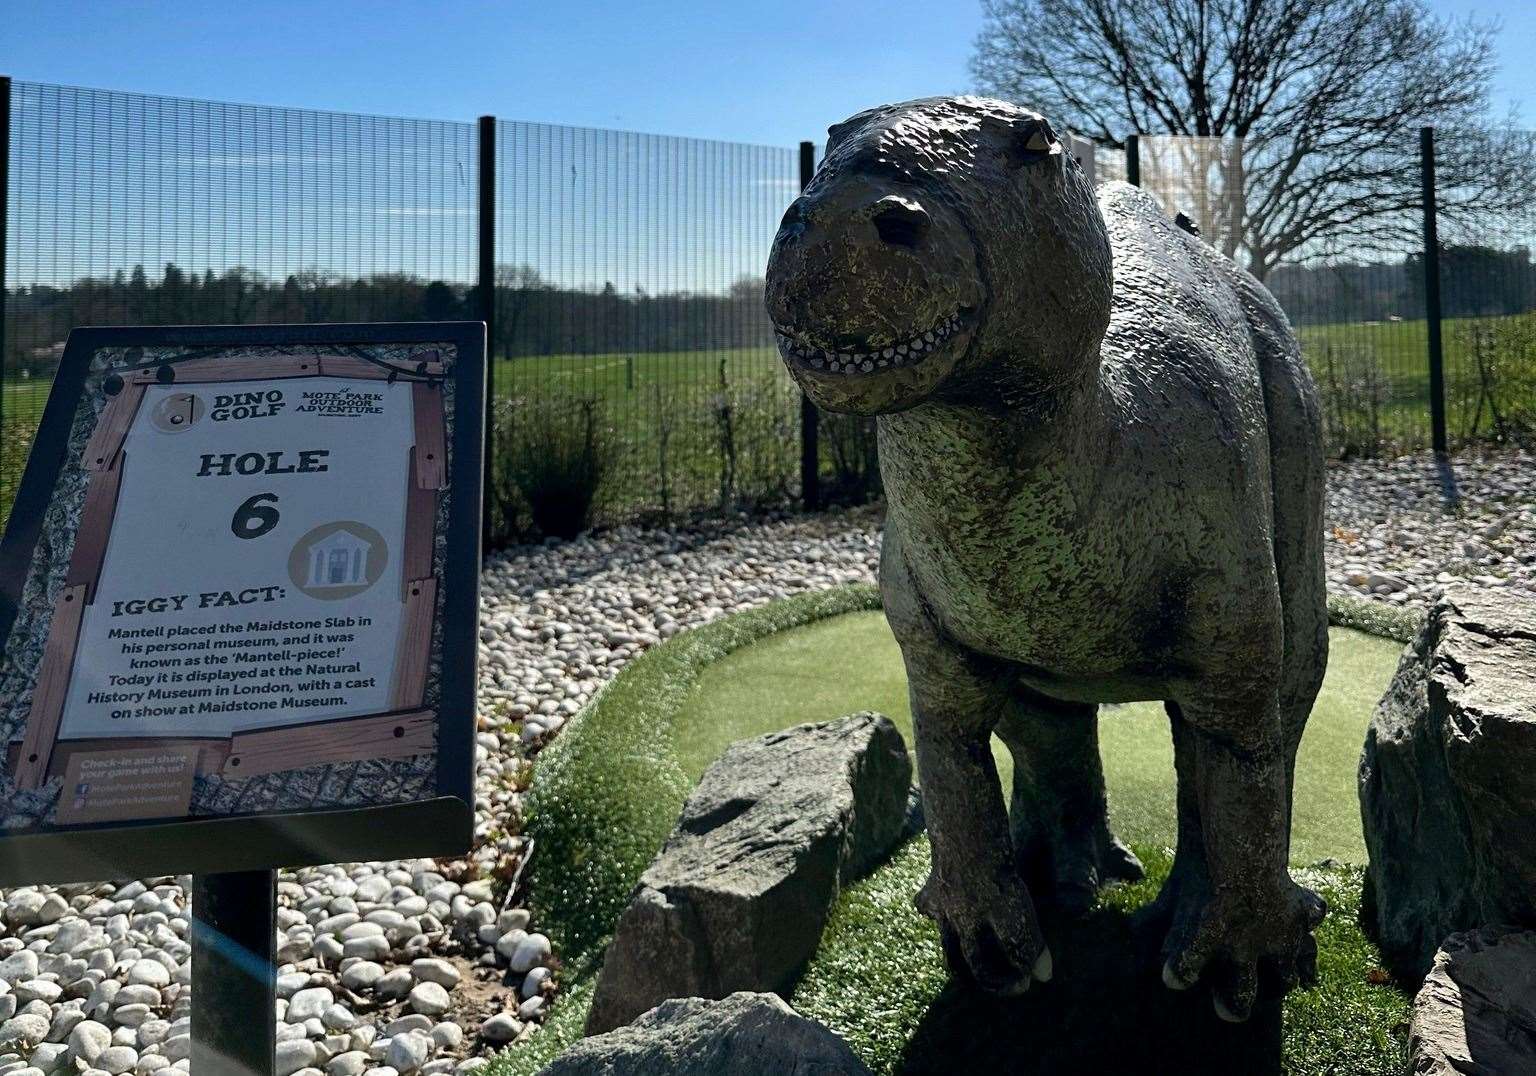 The dinosaur-themed mini golf in Mote Park, Maidstone, is getting an upgrade. Picture: Mote Park Outdoor Adventure Facebook